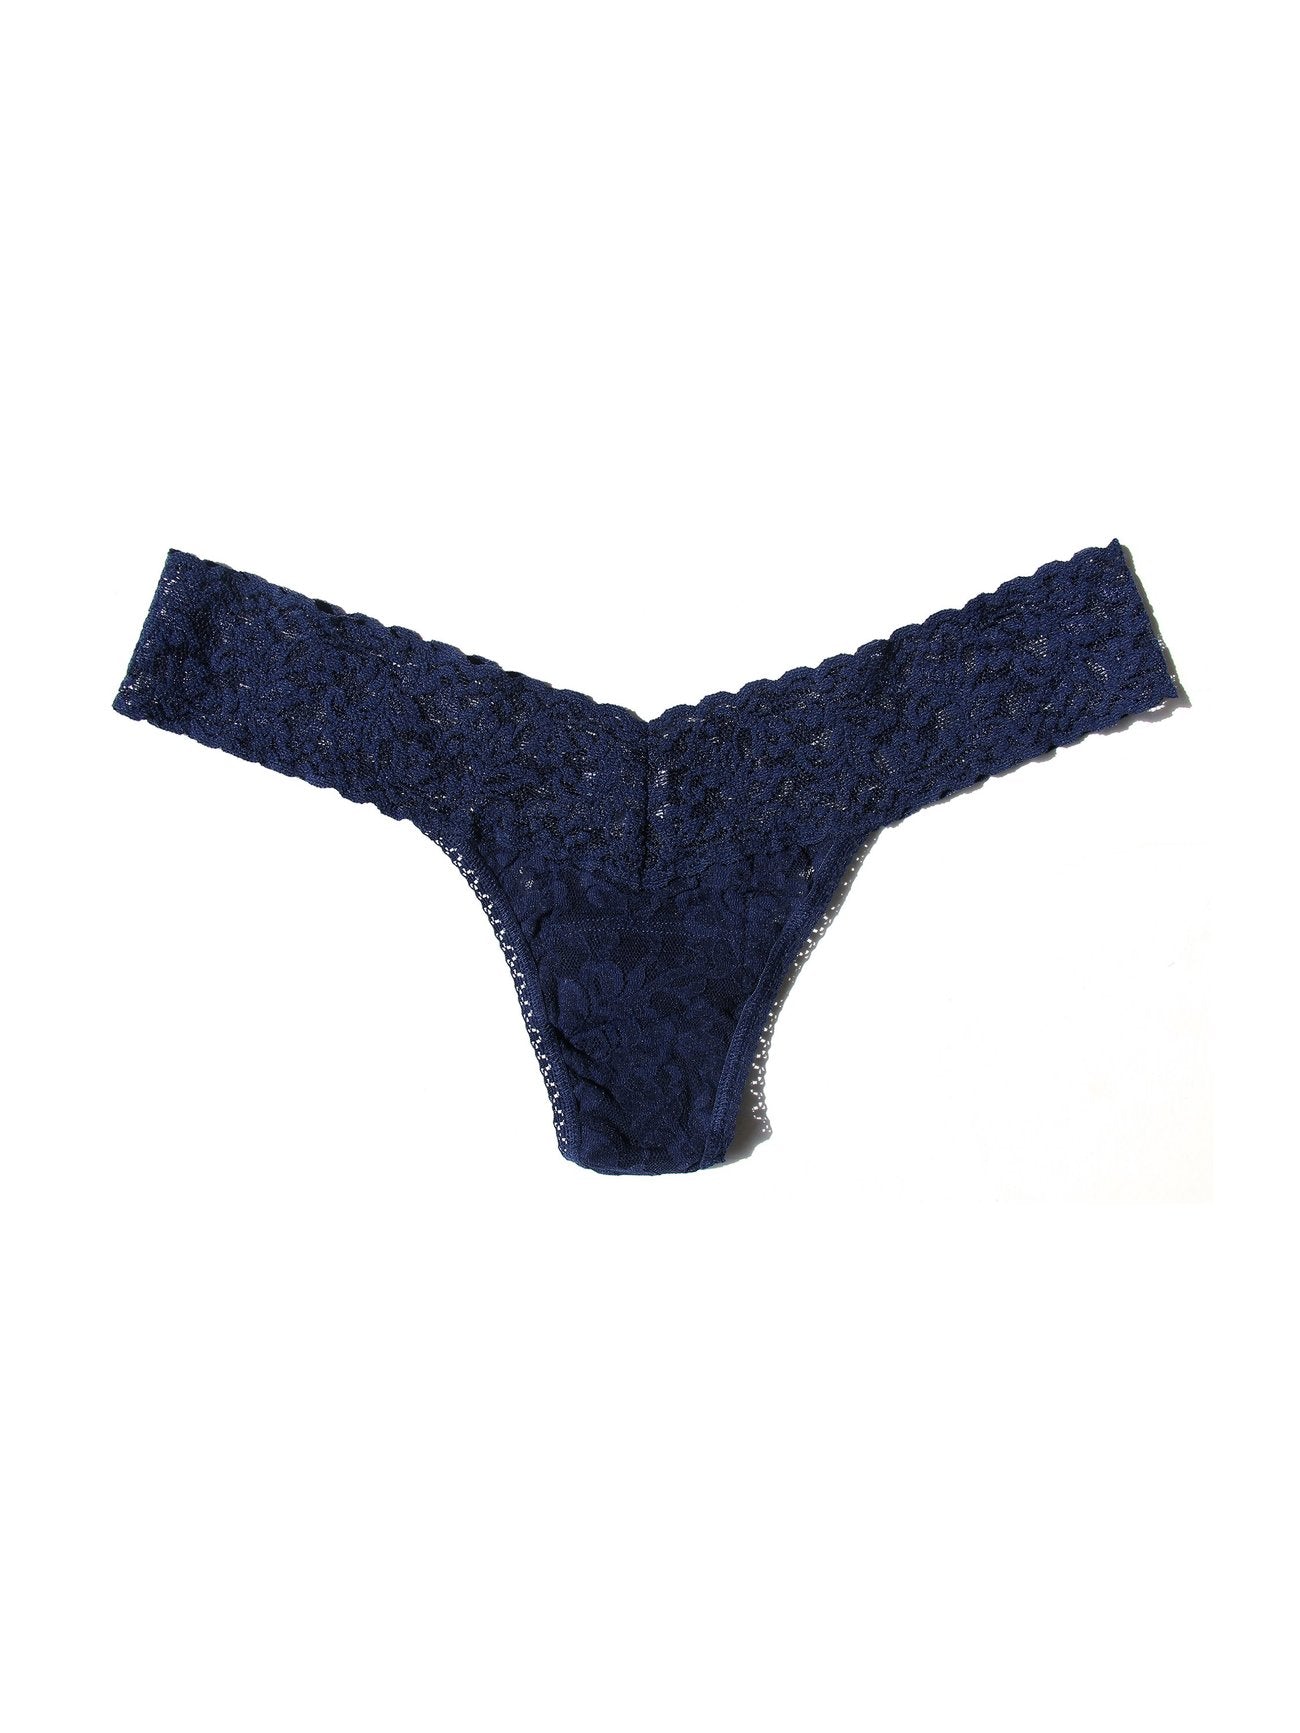 Signature Stretch Lace Low Rise Thong, Bundle 5 for $40